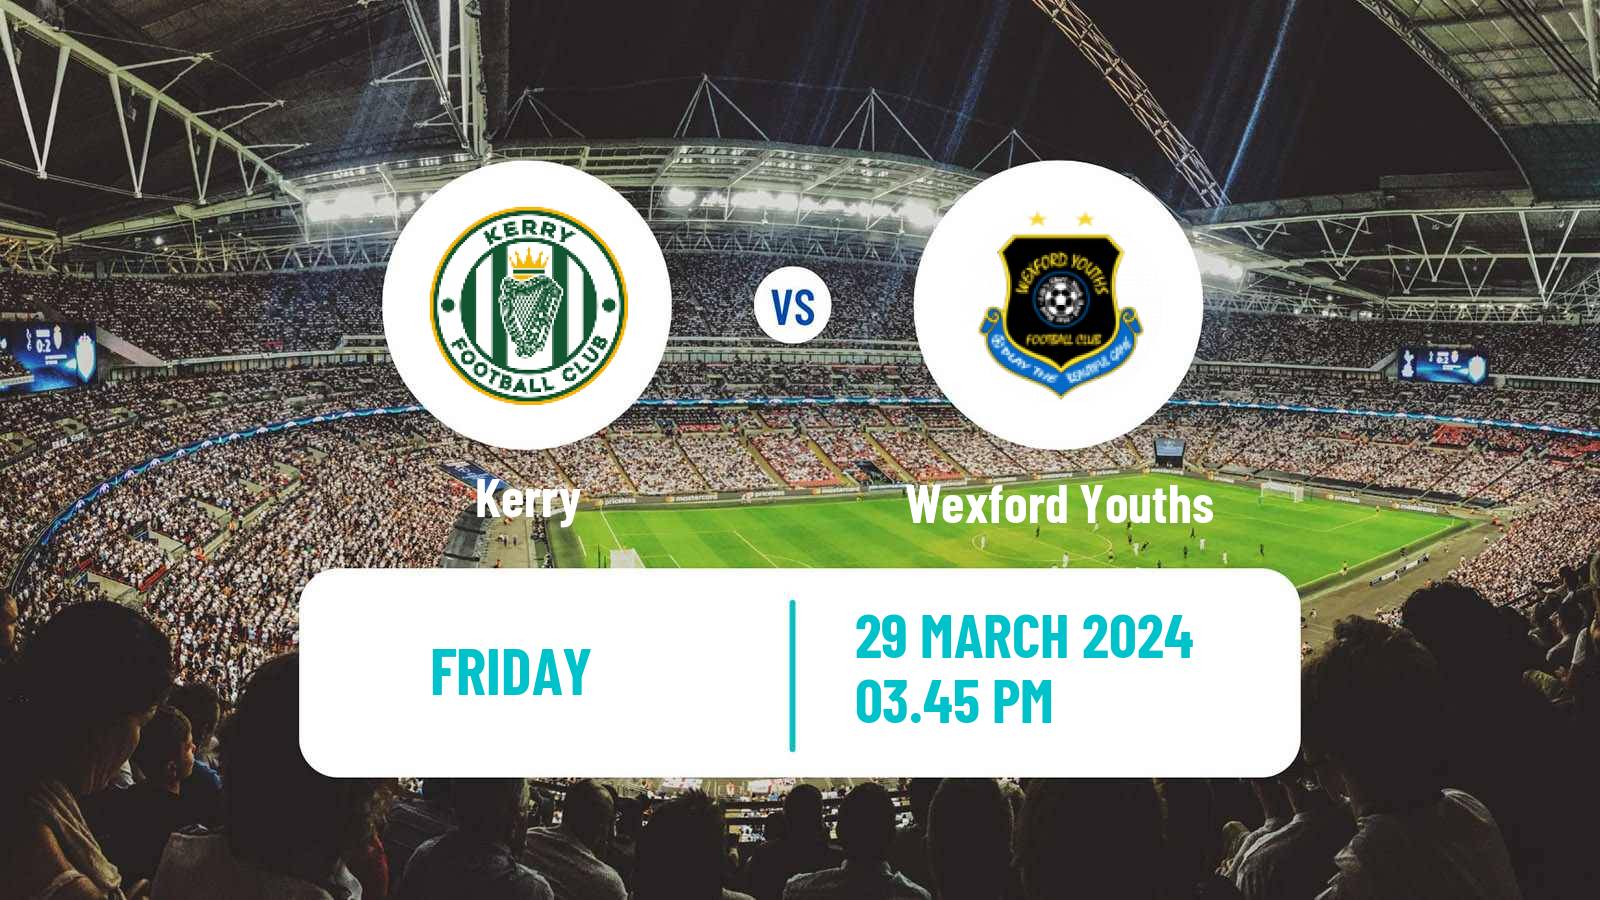 Soccer Irish Division 1 Kerry - Wexford Youths